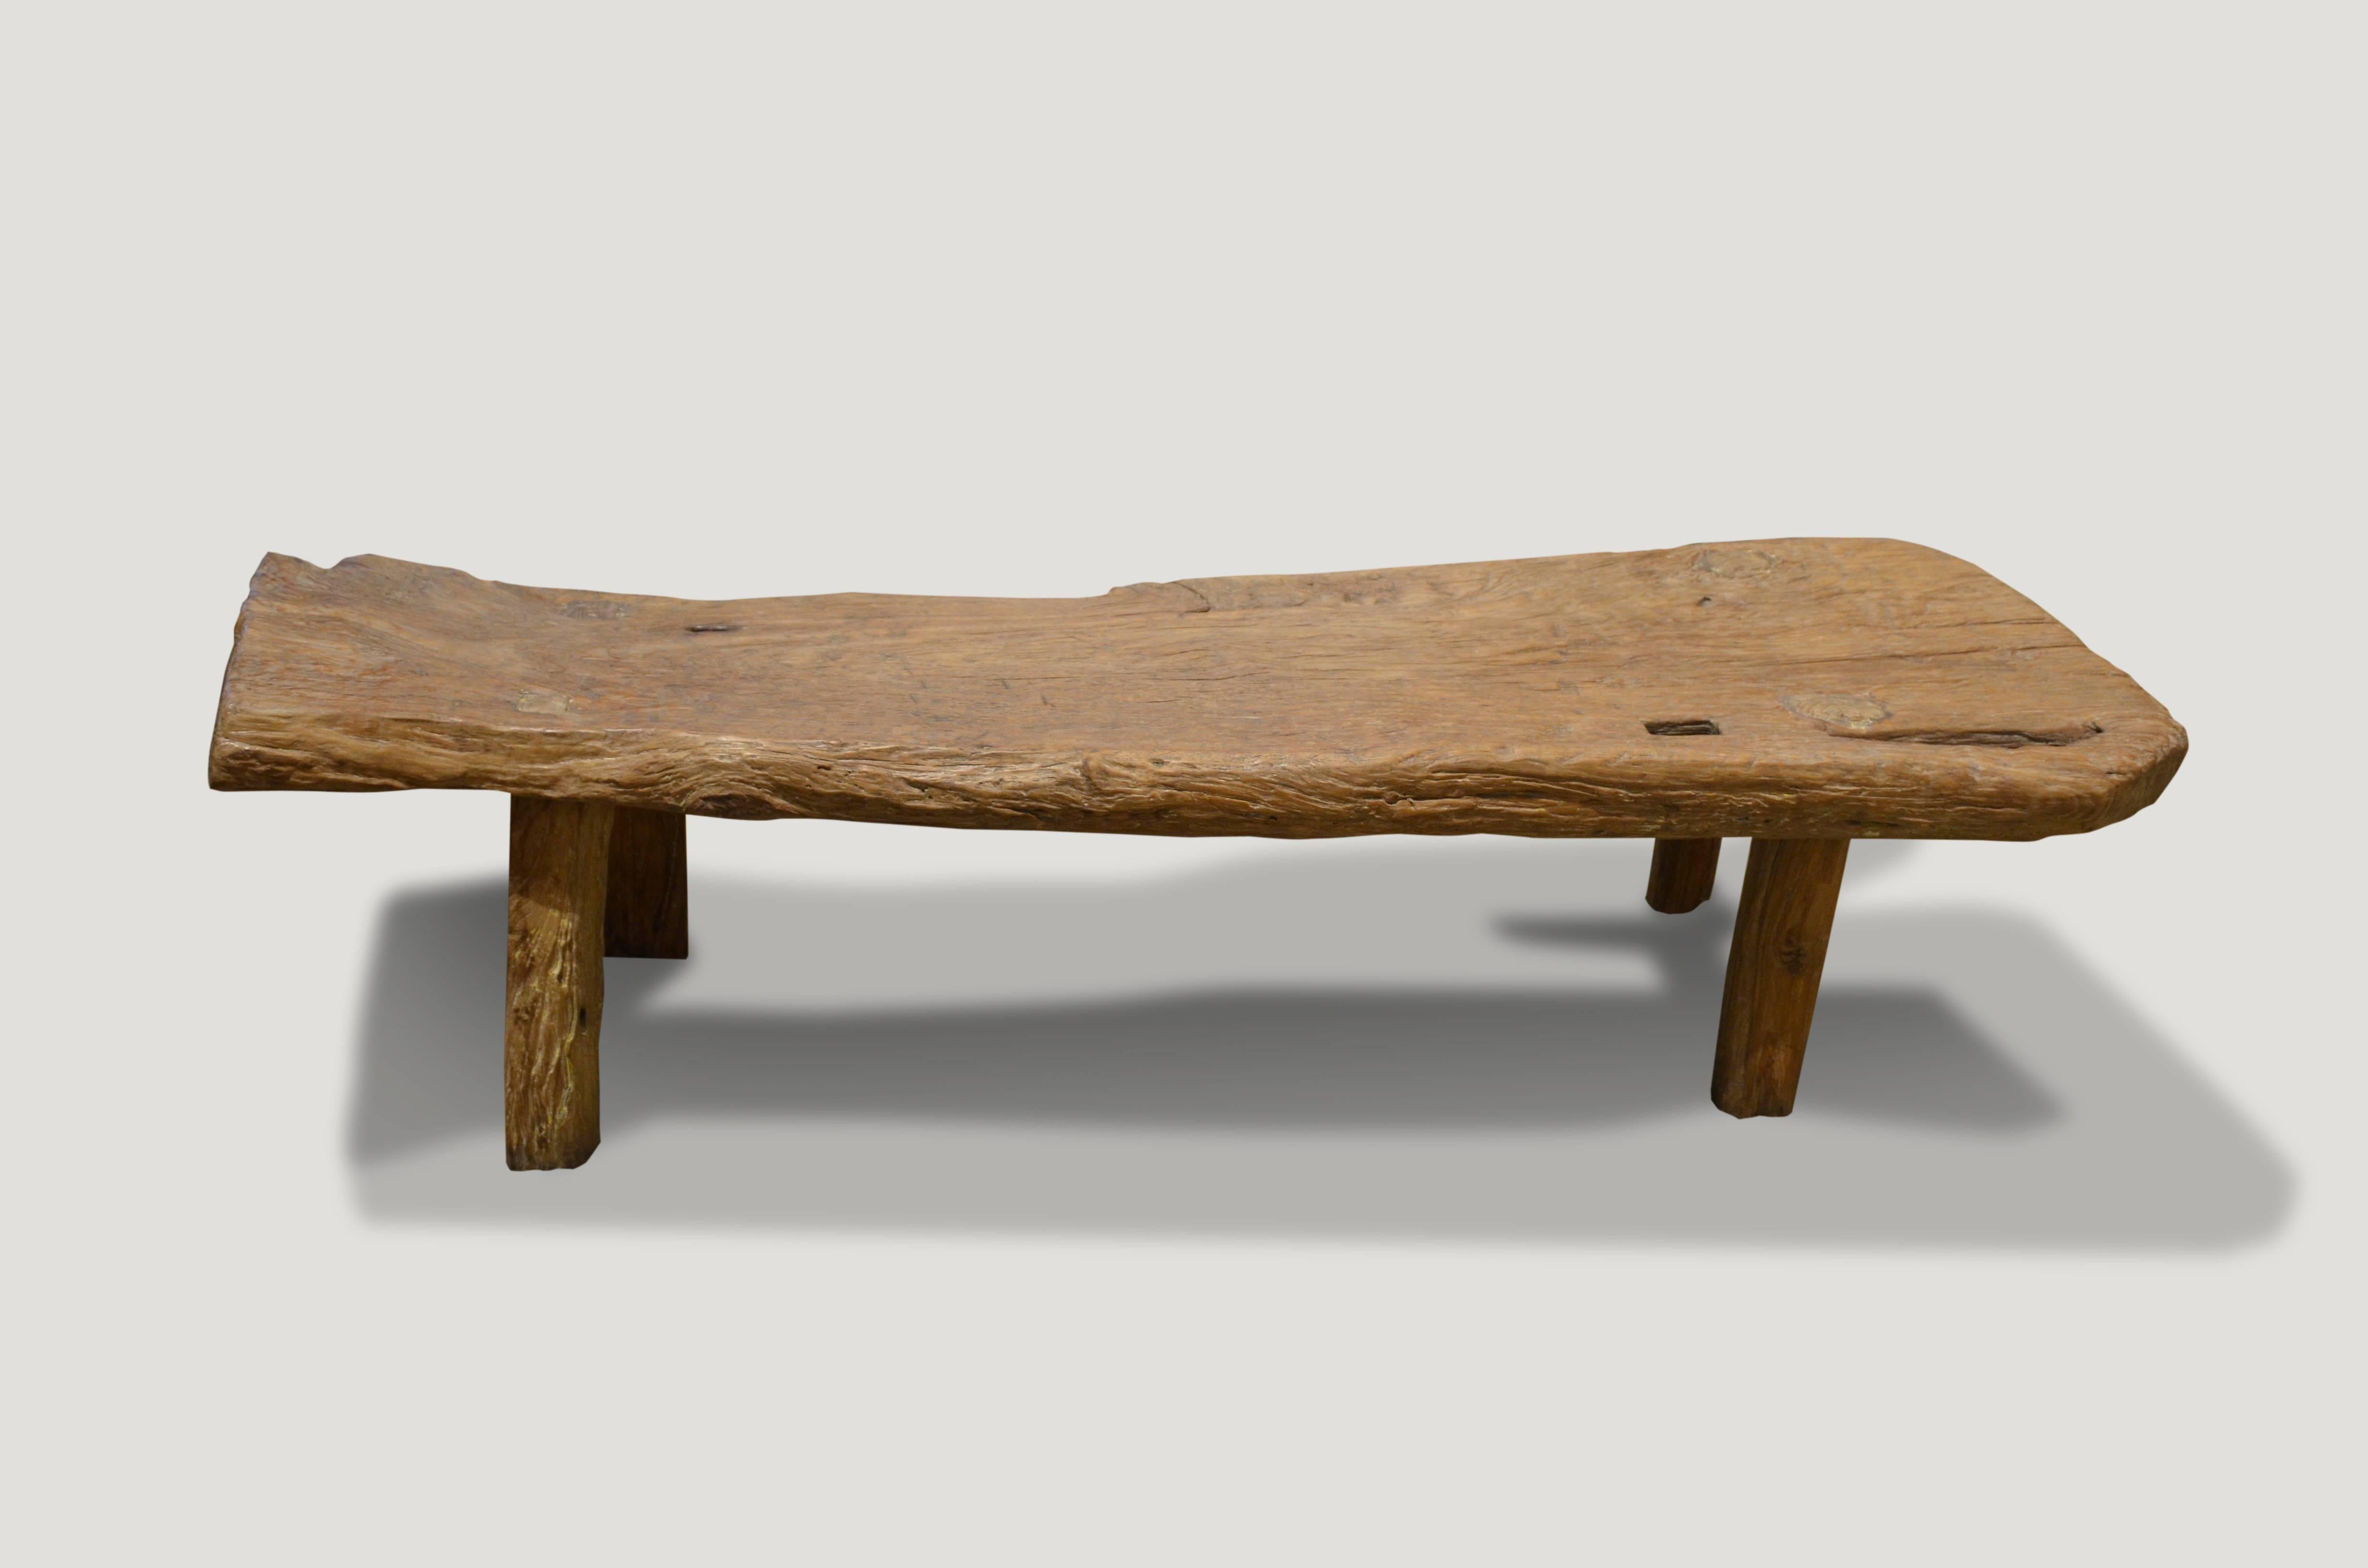 Antique teak wood, single slab top, bench or coffee table.

This bench or coffee table was sourced in the spirit of wabi-sabi, a Japanese philosophy that beauty can be found in imperfection and impermanence. It’s a beauty of things modest and